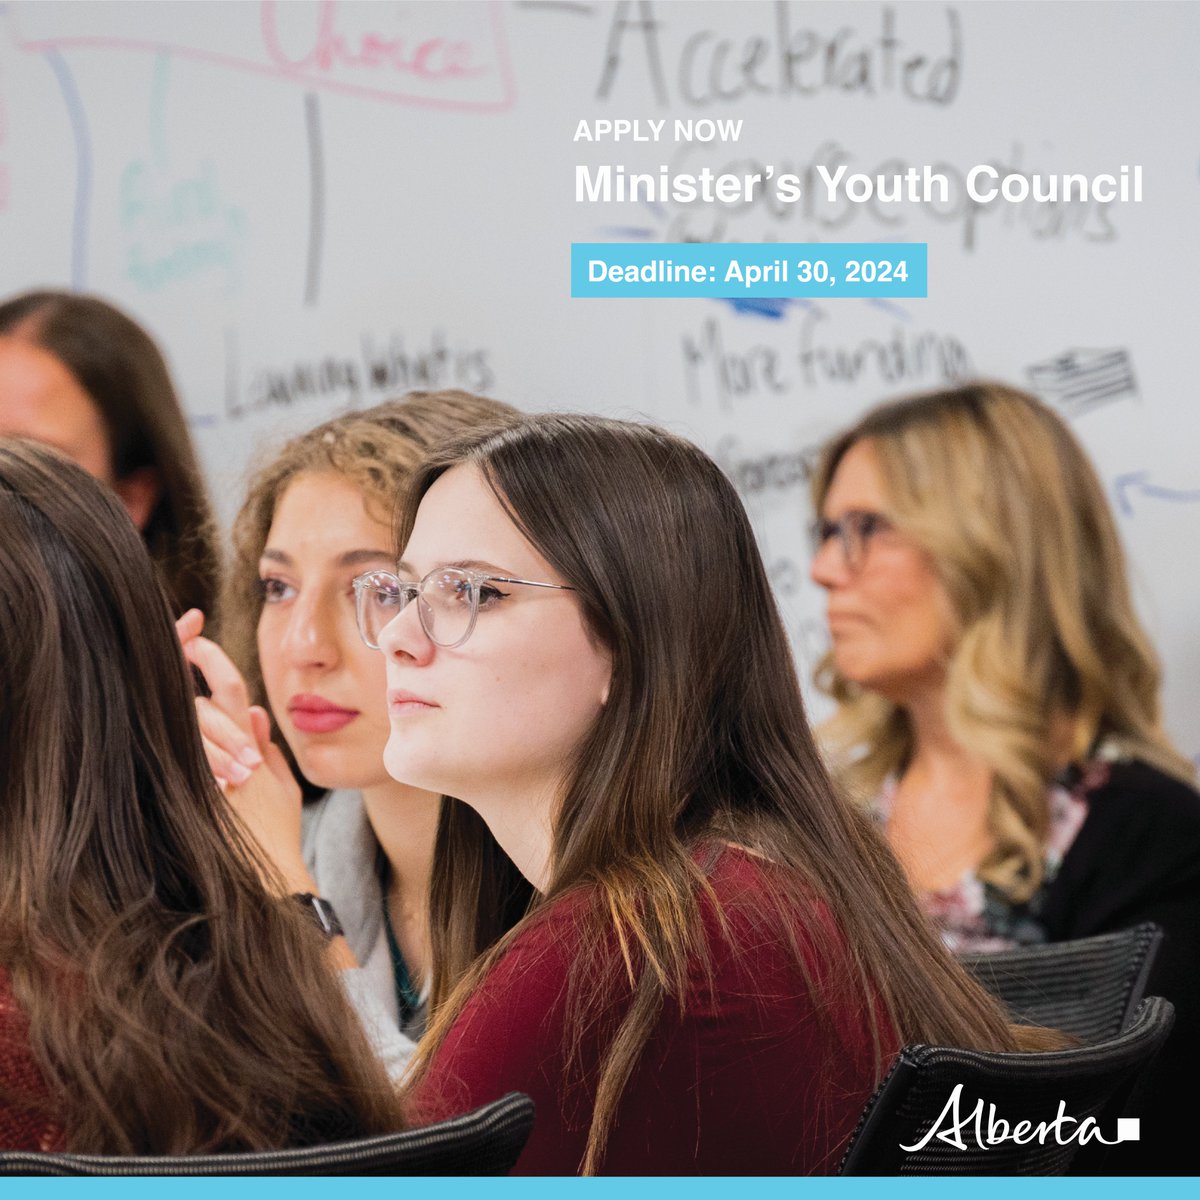 Passionate about education? Want to meet and collaborate with like-minded students from across the province? Apply to join the Minister’s Youth Council! alberta.ca/student-engage…